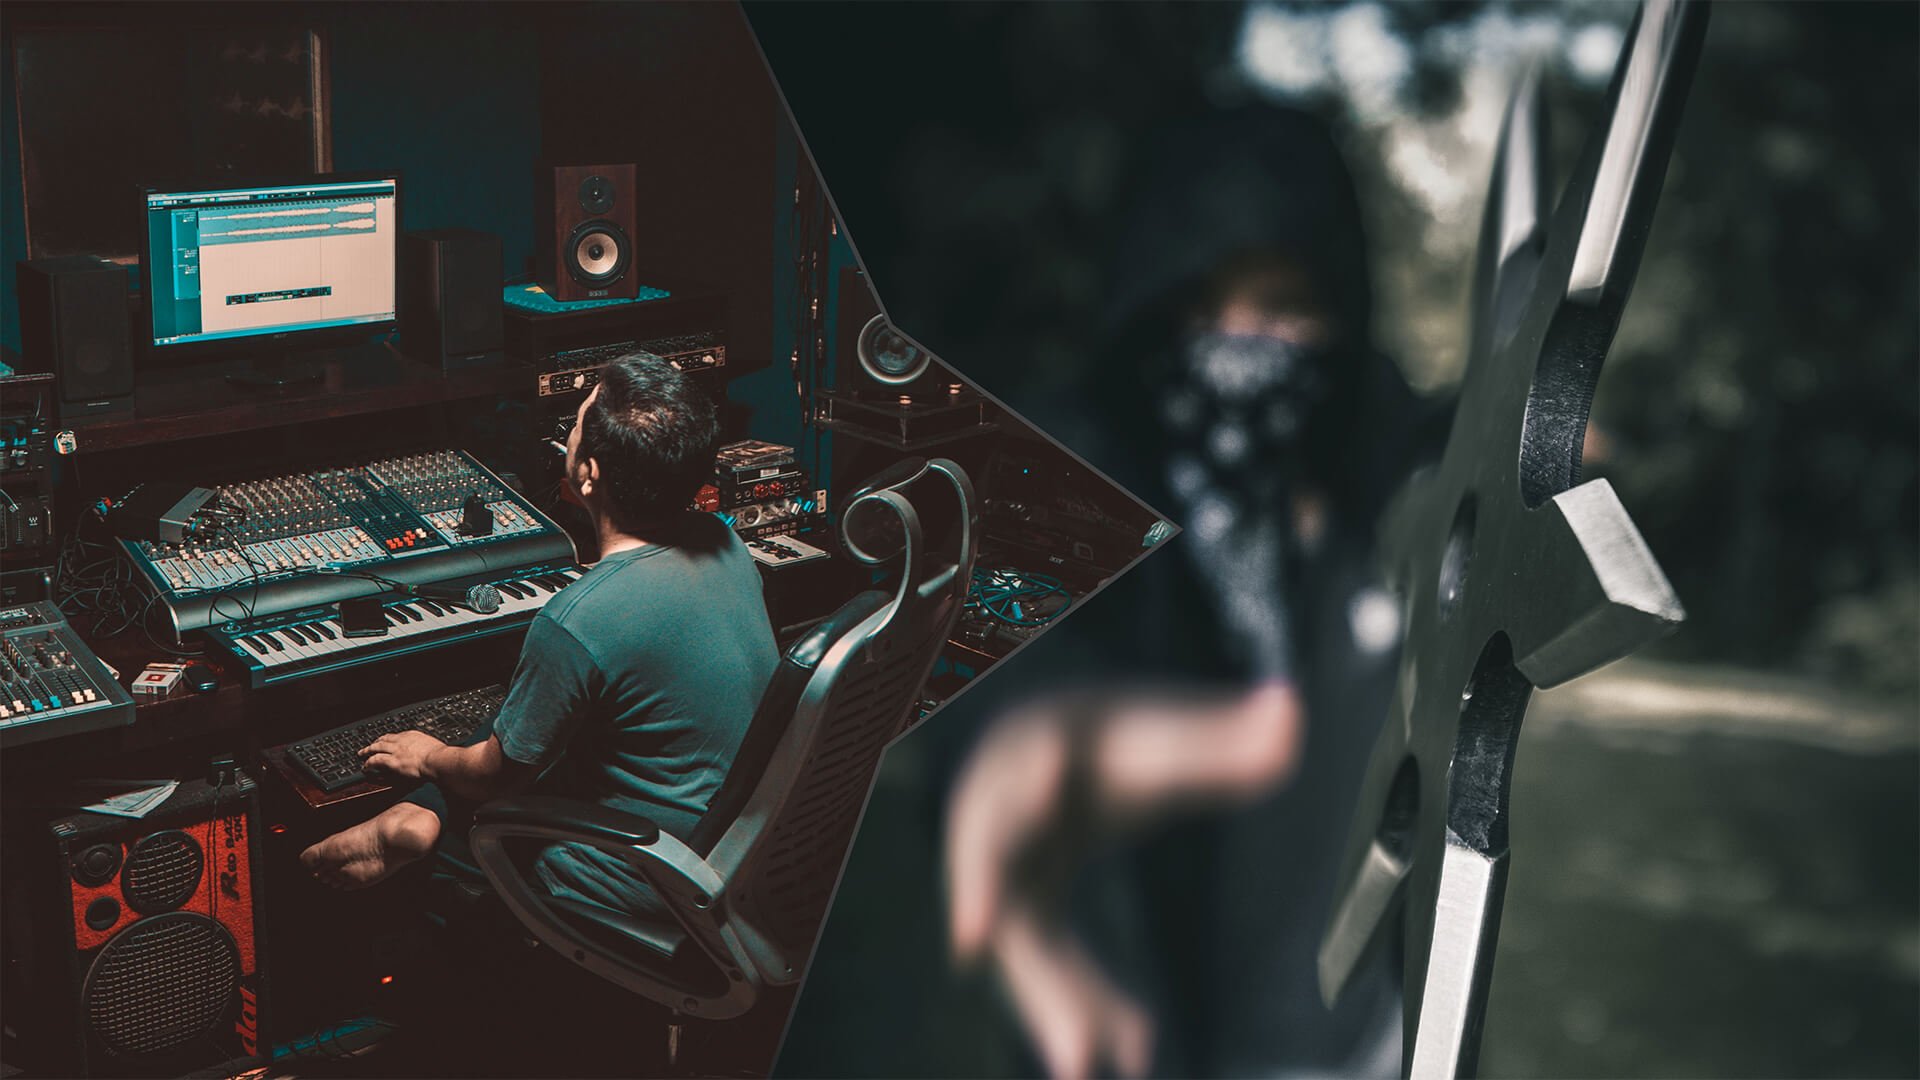 A collage with two images side-to-side showing an audio engineer sitting in a control room of a recording studio and a ninja throwing a star shuriken, used here as a metaphor that by specializing to a specific field of your sector will become a master of your craft.